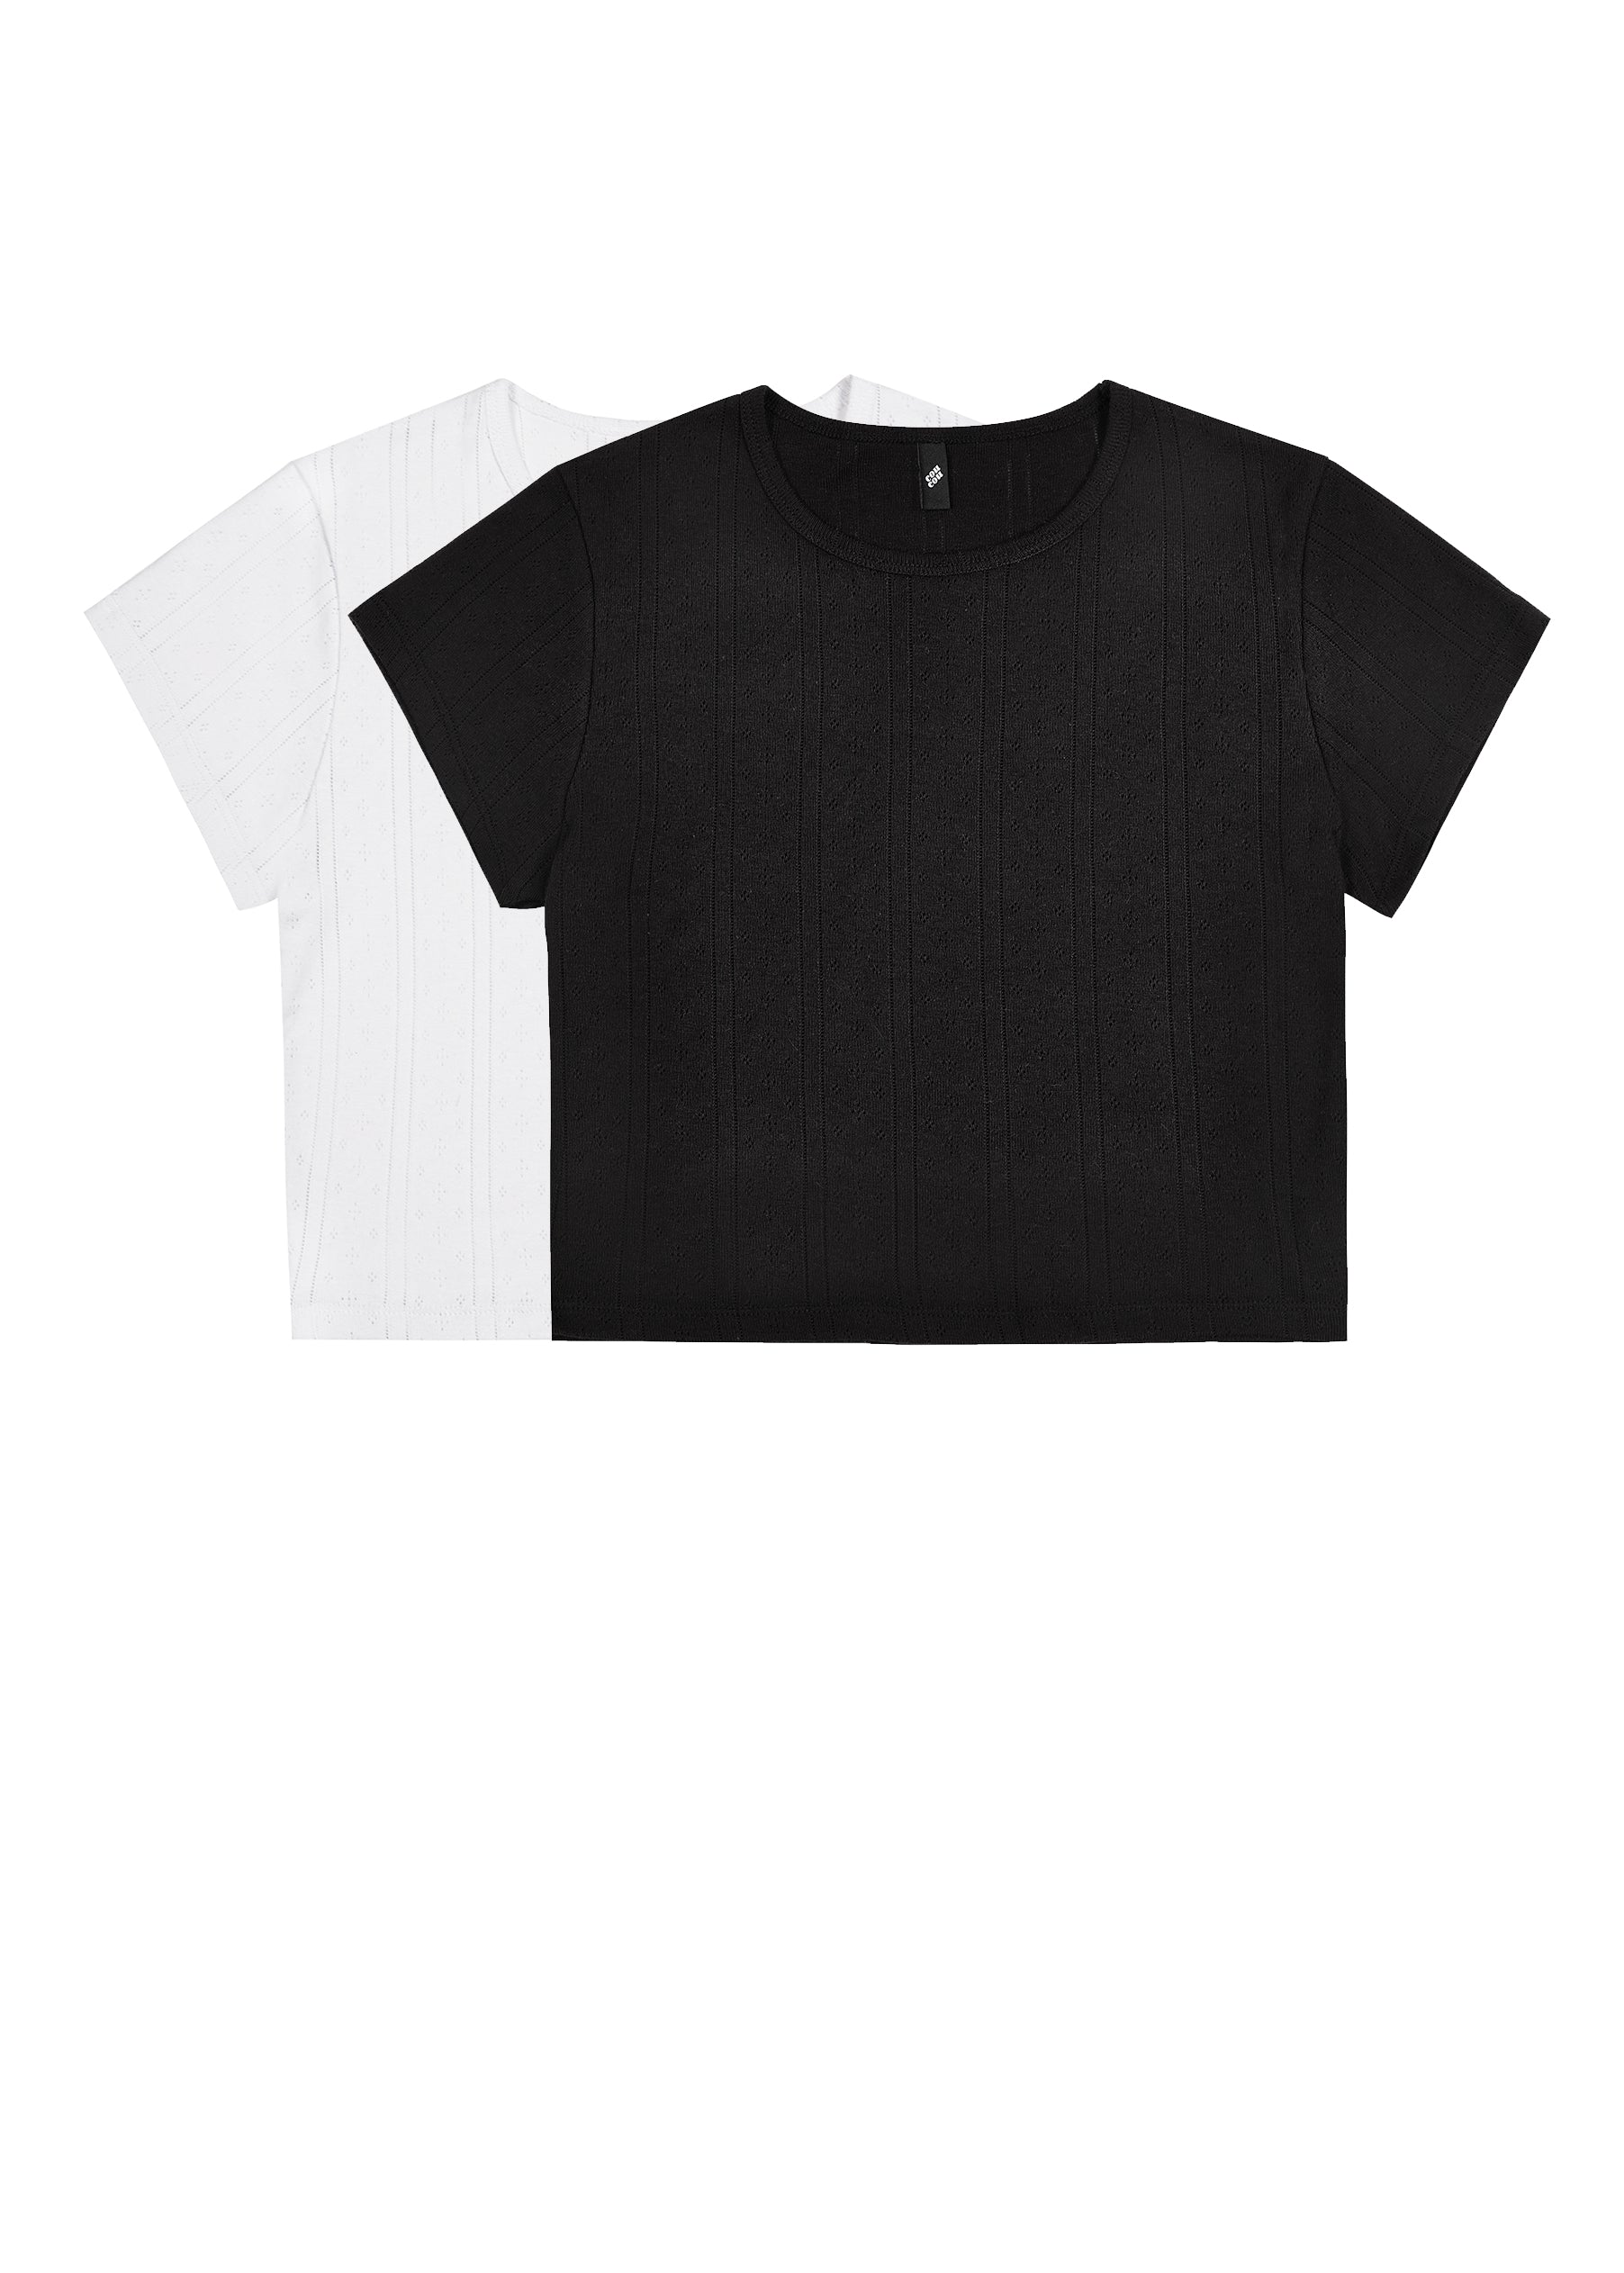 The Baby Tee: Two Pack